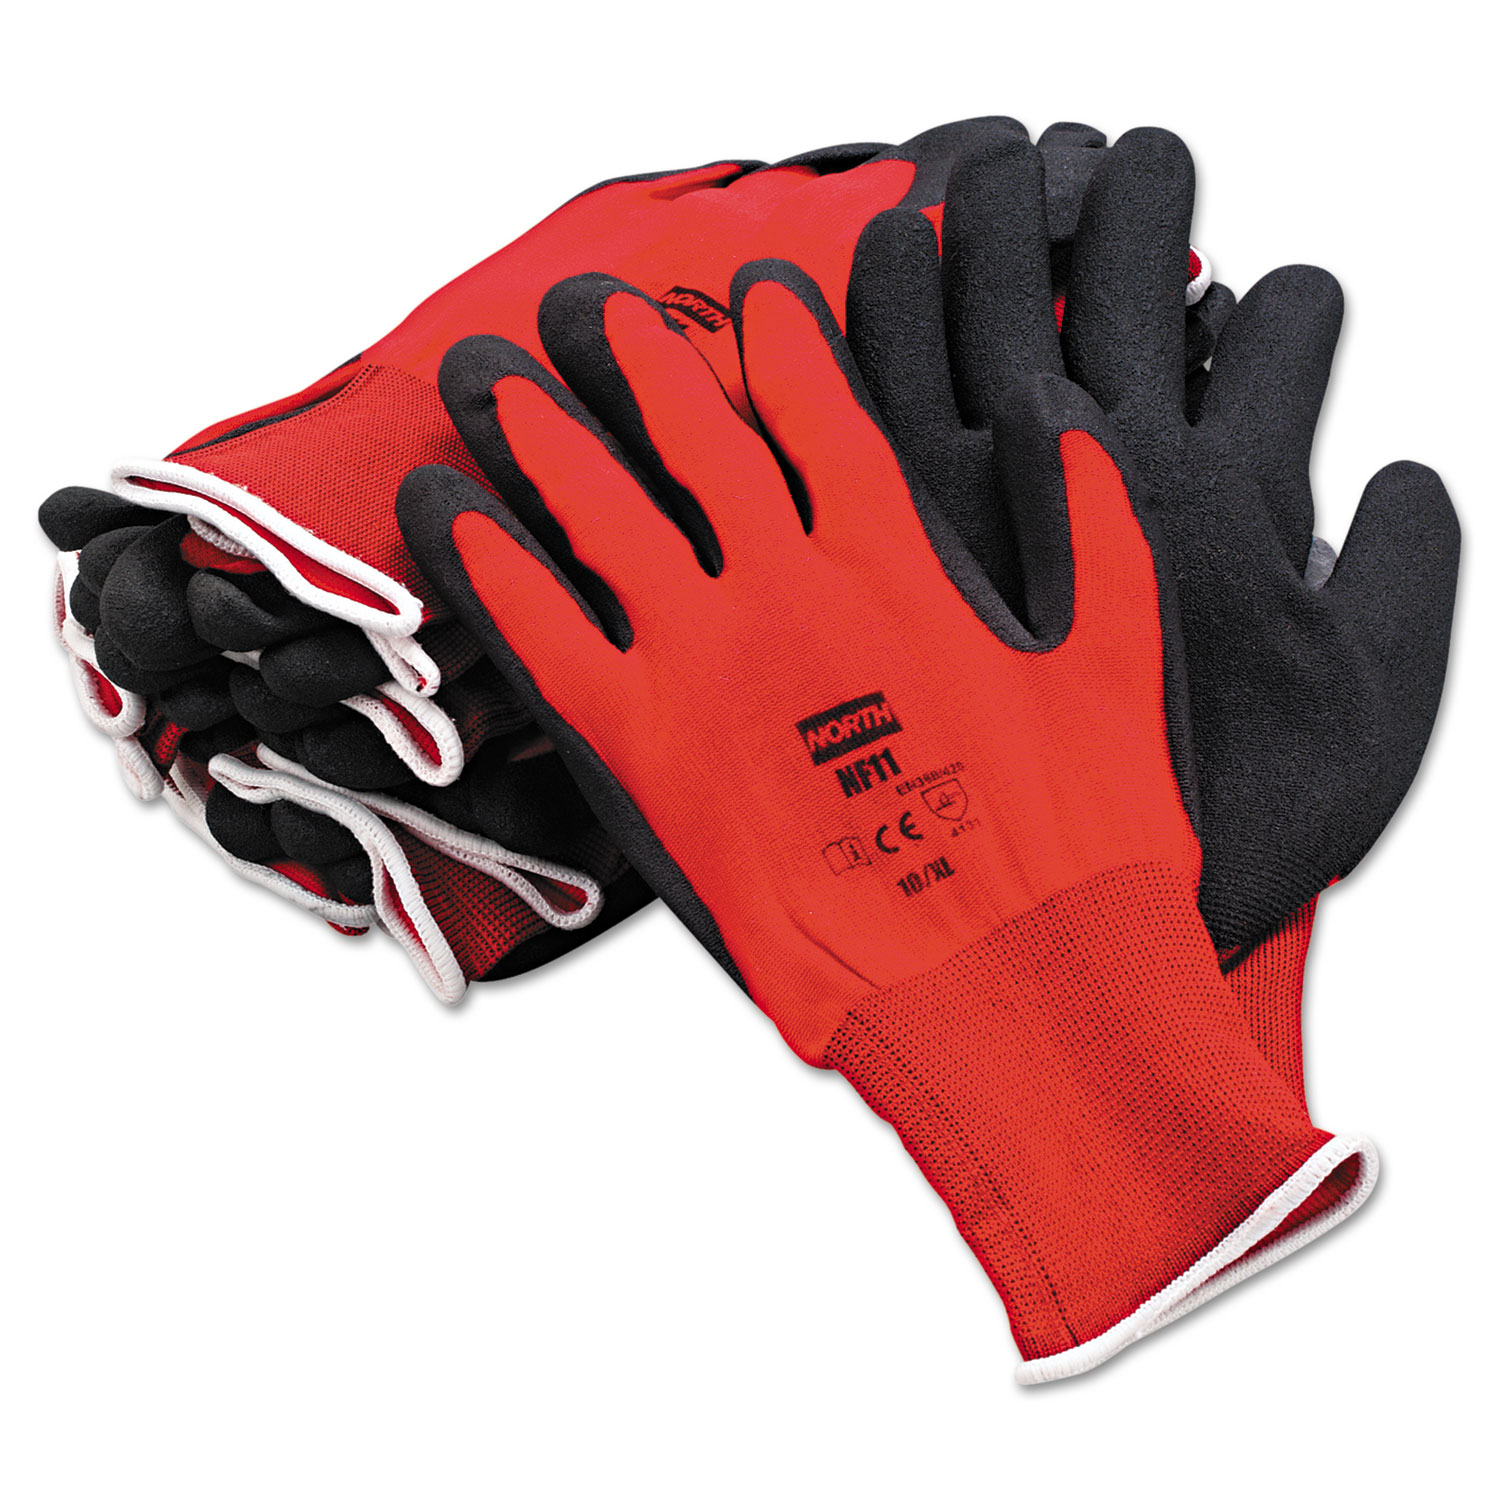  North Safety NF11/10XL NorthFlex Red Foamed PVC Gloves, Red/Black, Size 10/XL, 12 Pairs (NSPNF1110XL) 